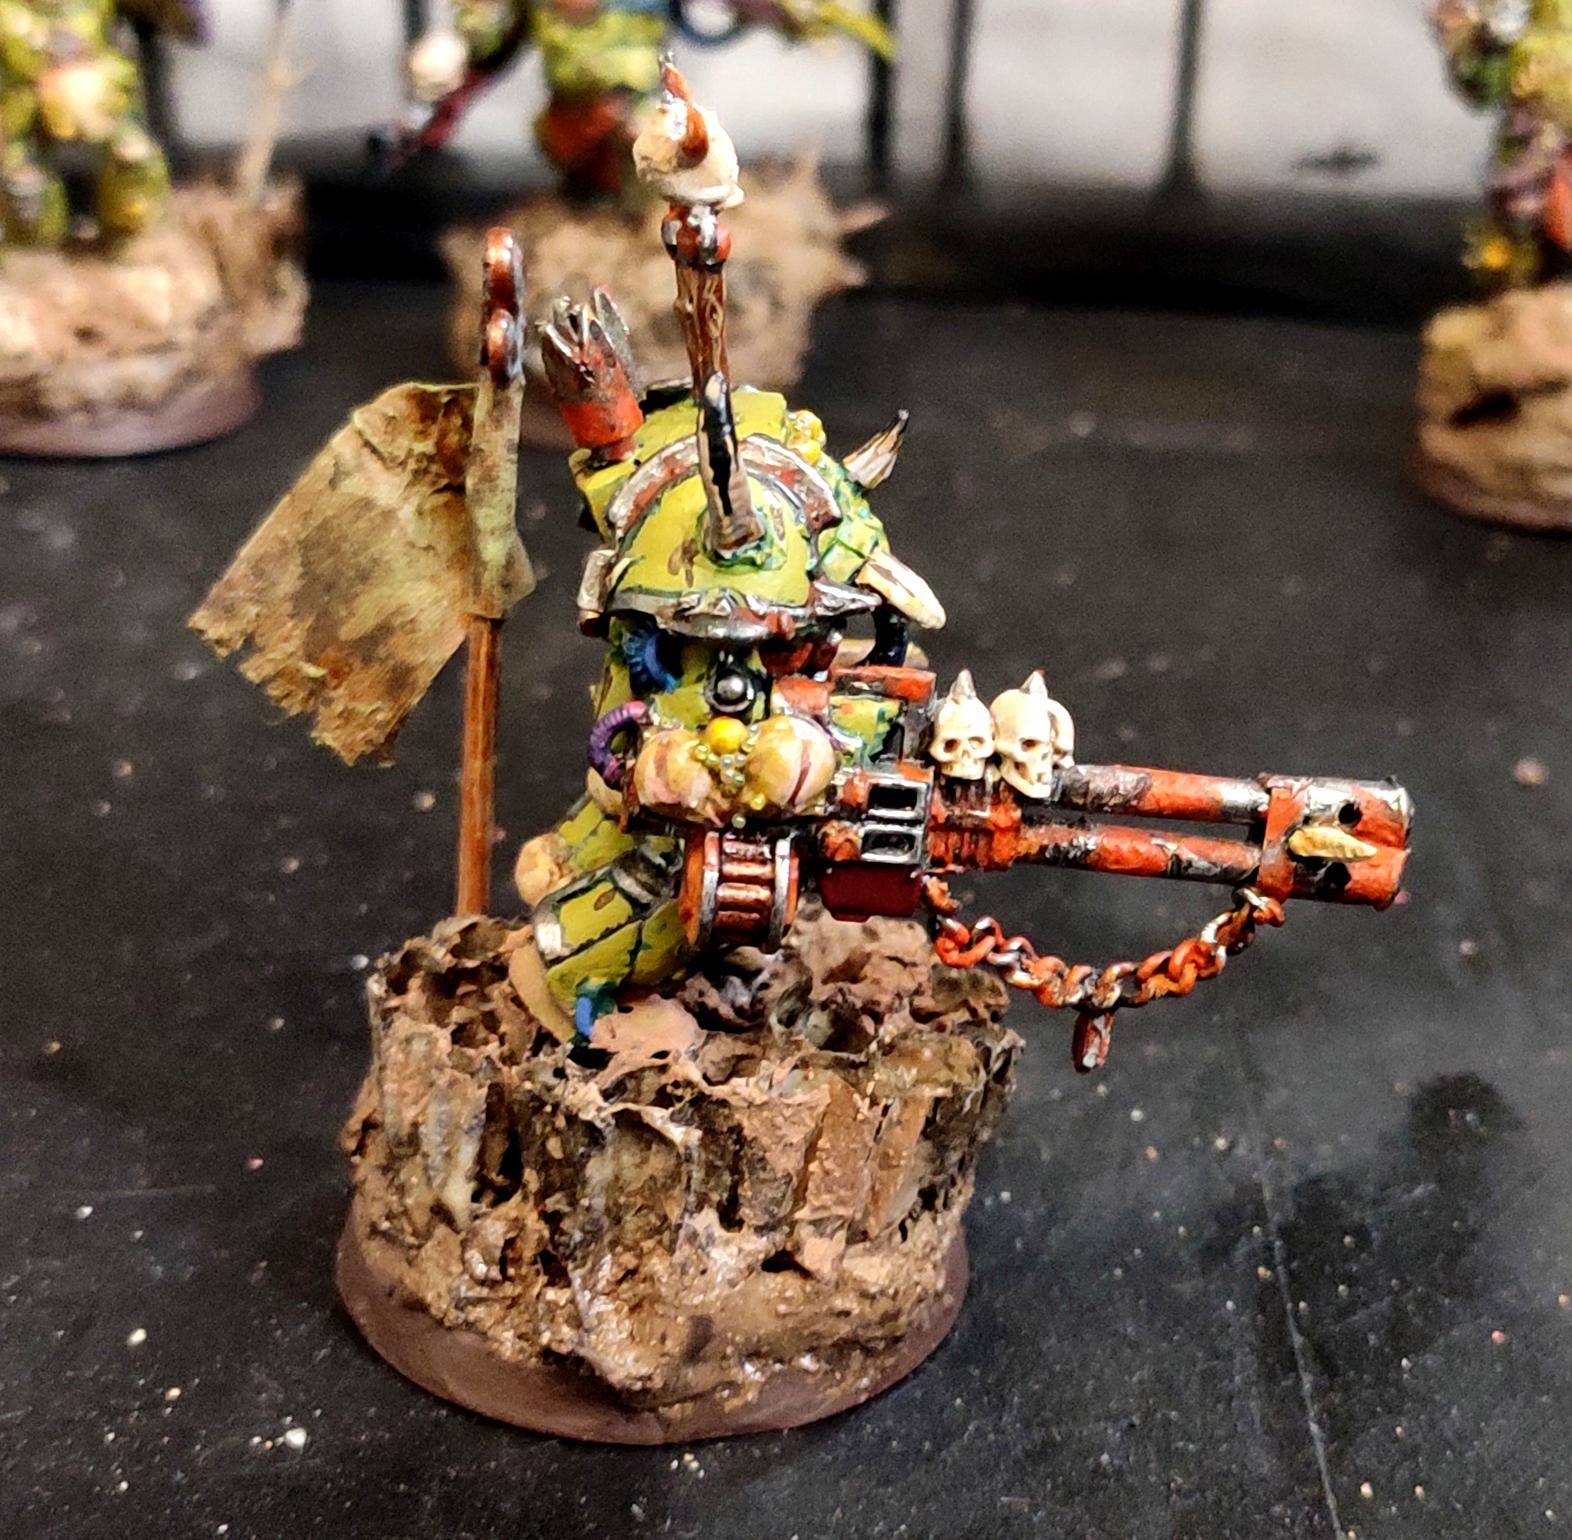 Blight, Casting, Chaos, Chaos Space Marines, Conversion, Death Guard, Decay, Disease, Heresy, Heretic Astartes, Infantry, Nurgle, Pestilence, Plague, Plague Marines, Reaper Autocannon, Rot, Rust, Sculpting, Tentacle, Terminator Armor, Traitor Legions, Warhammer 40,000, Wasp Nest